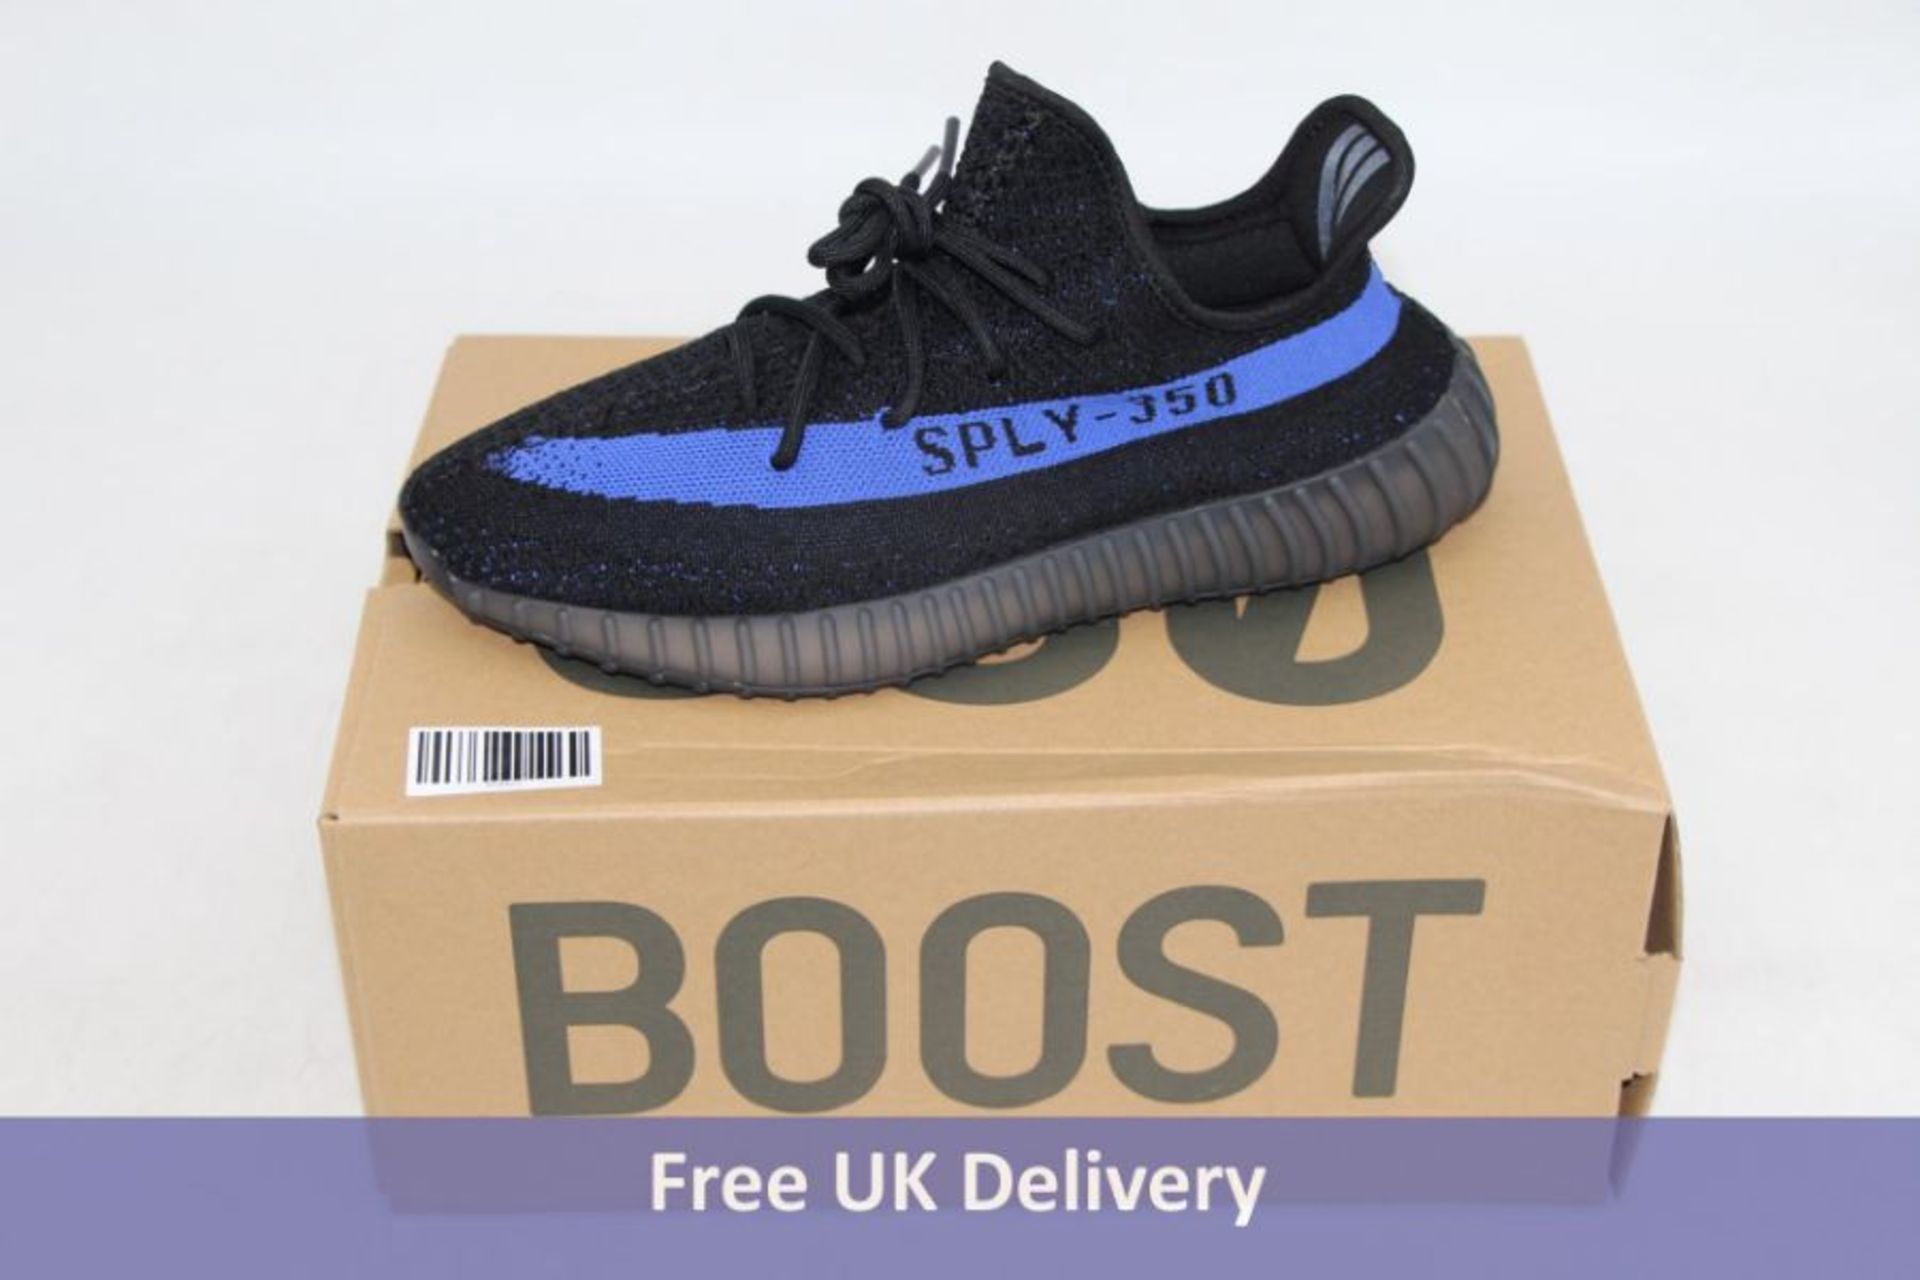 Adidas Yeezy Men's Boost 350 V2 Trainers, Dazzling Blue/Core Black, UK 10.5